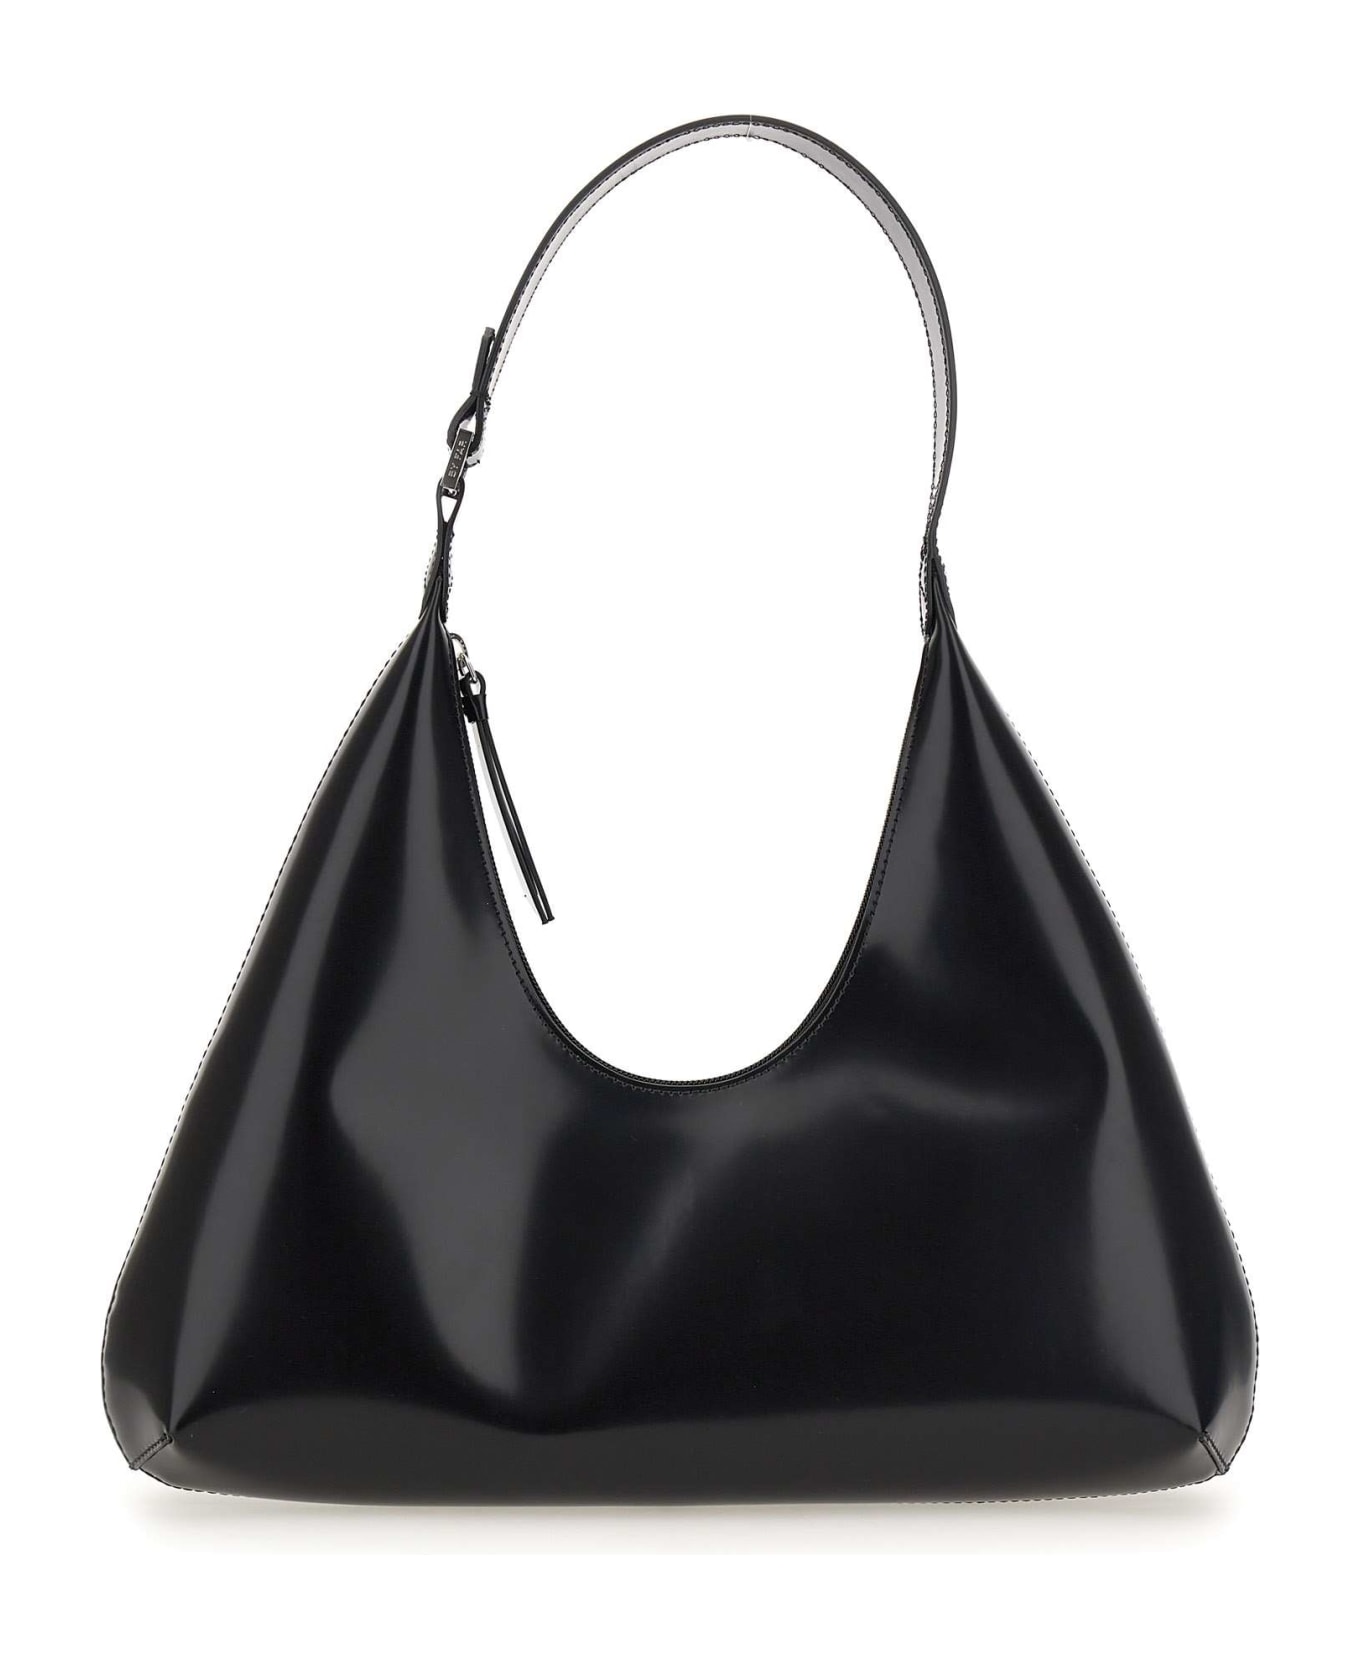 BY FAR 'amber' Leather Bag - Black